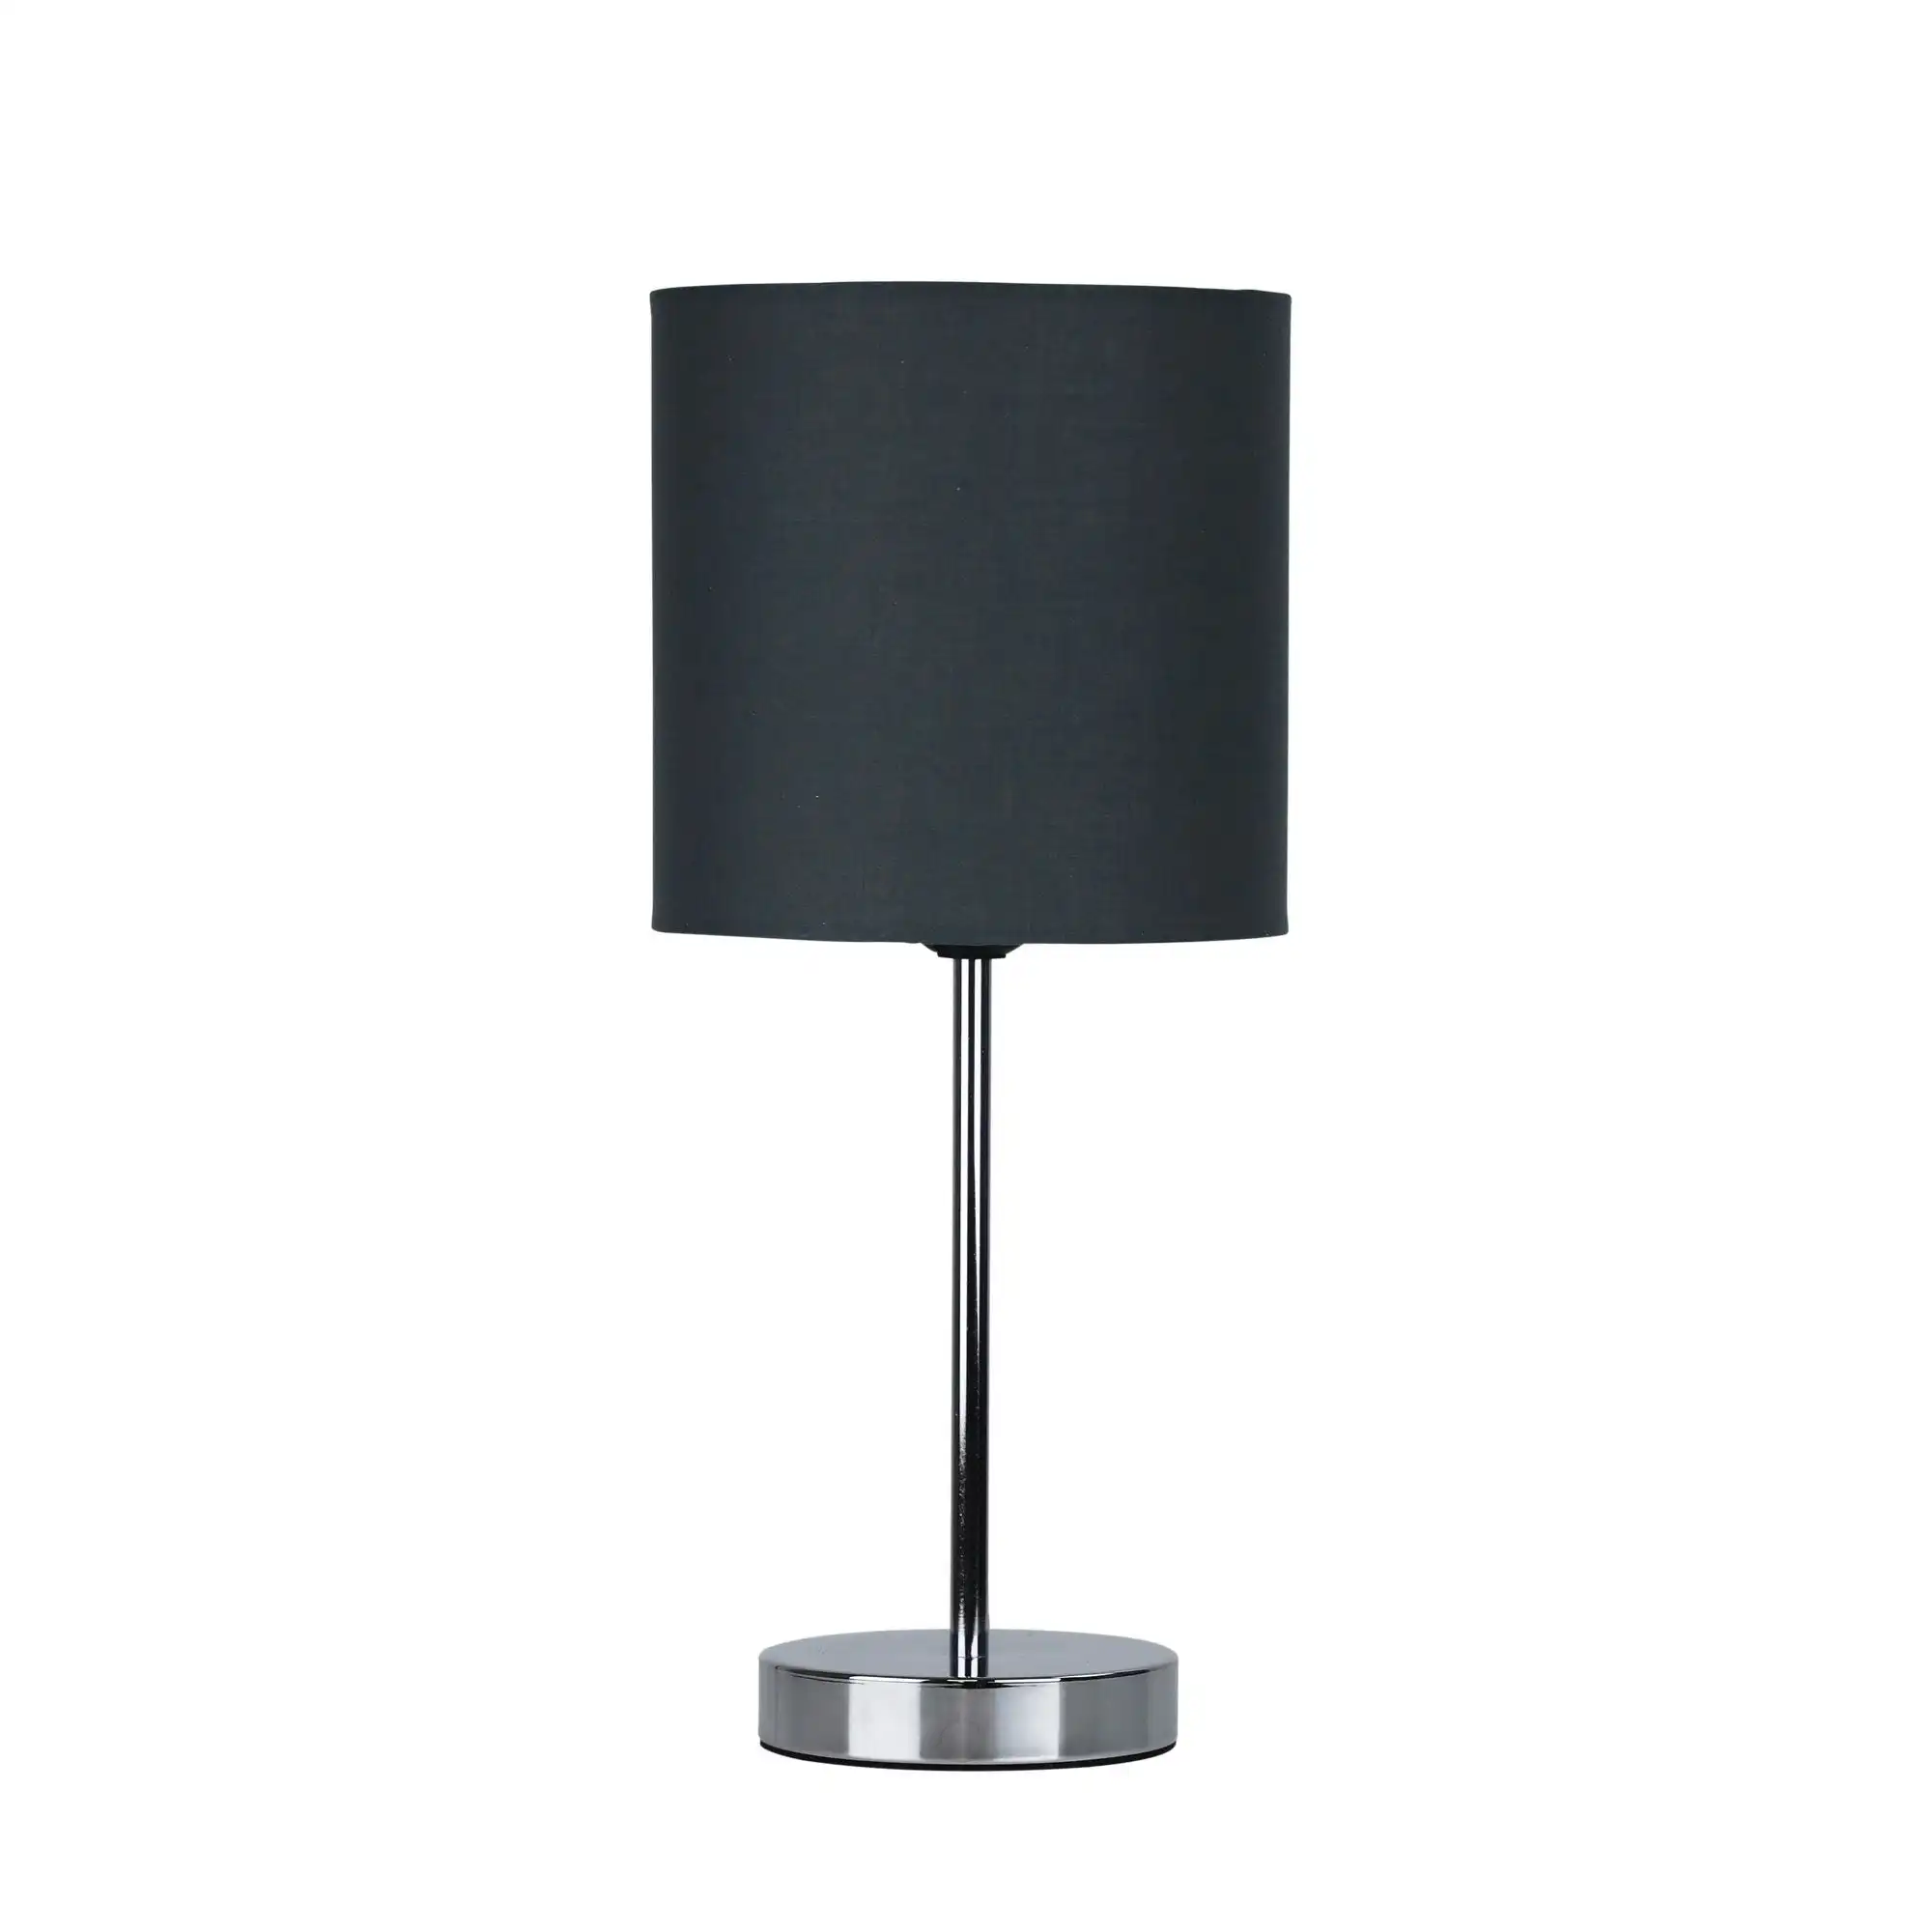 ZOLA TABLE LAMP Chrome Base with Grey Shade